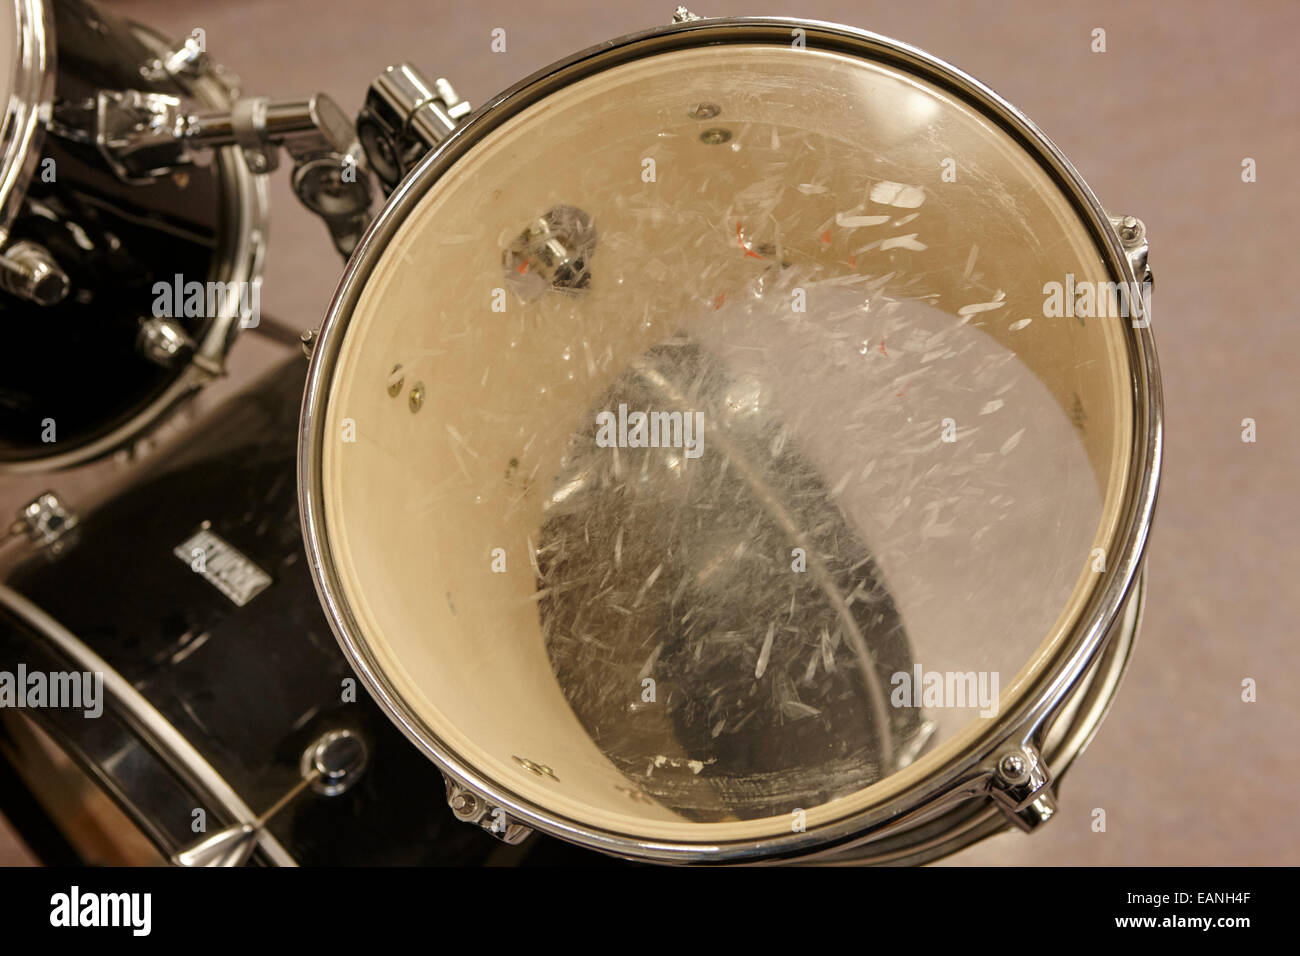 well worn drum skin on a drum kit in a music training room Stock Photo